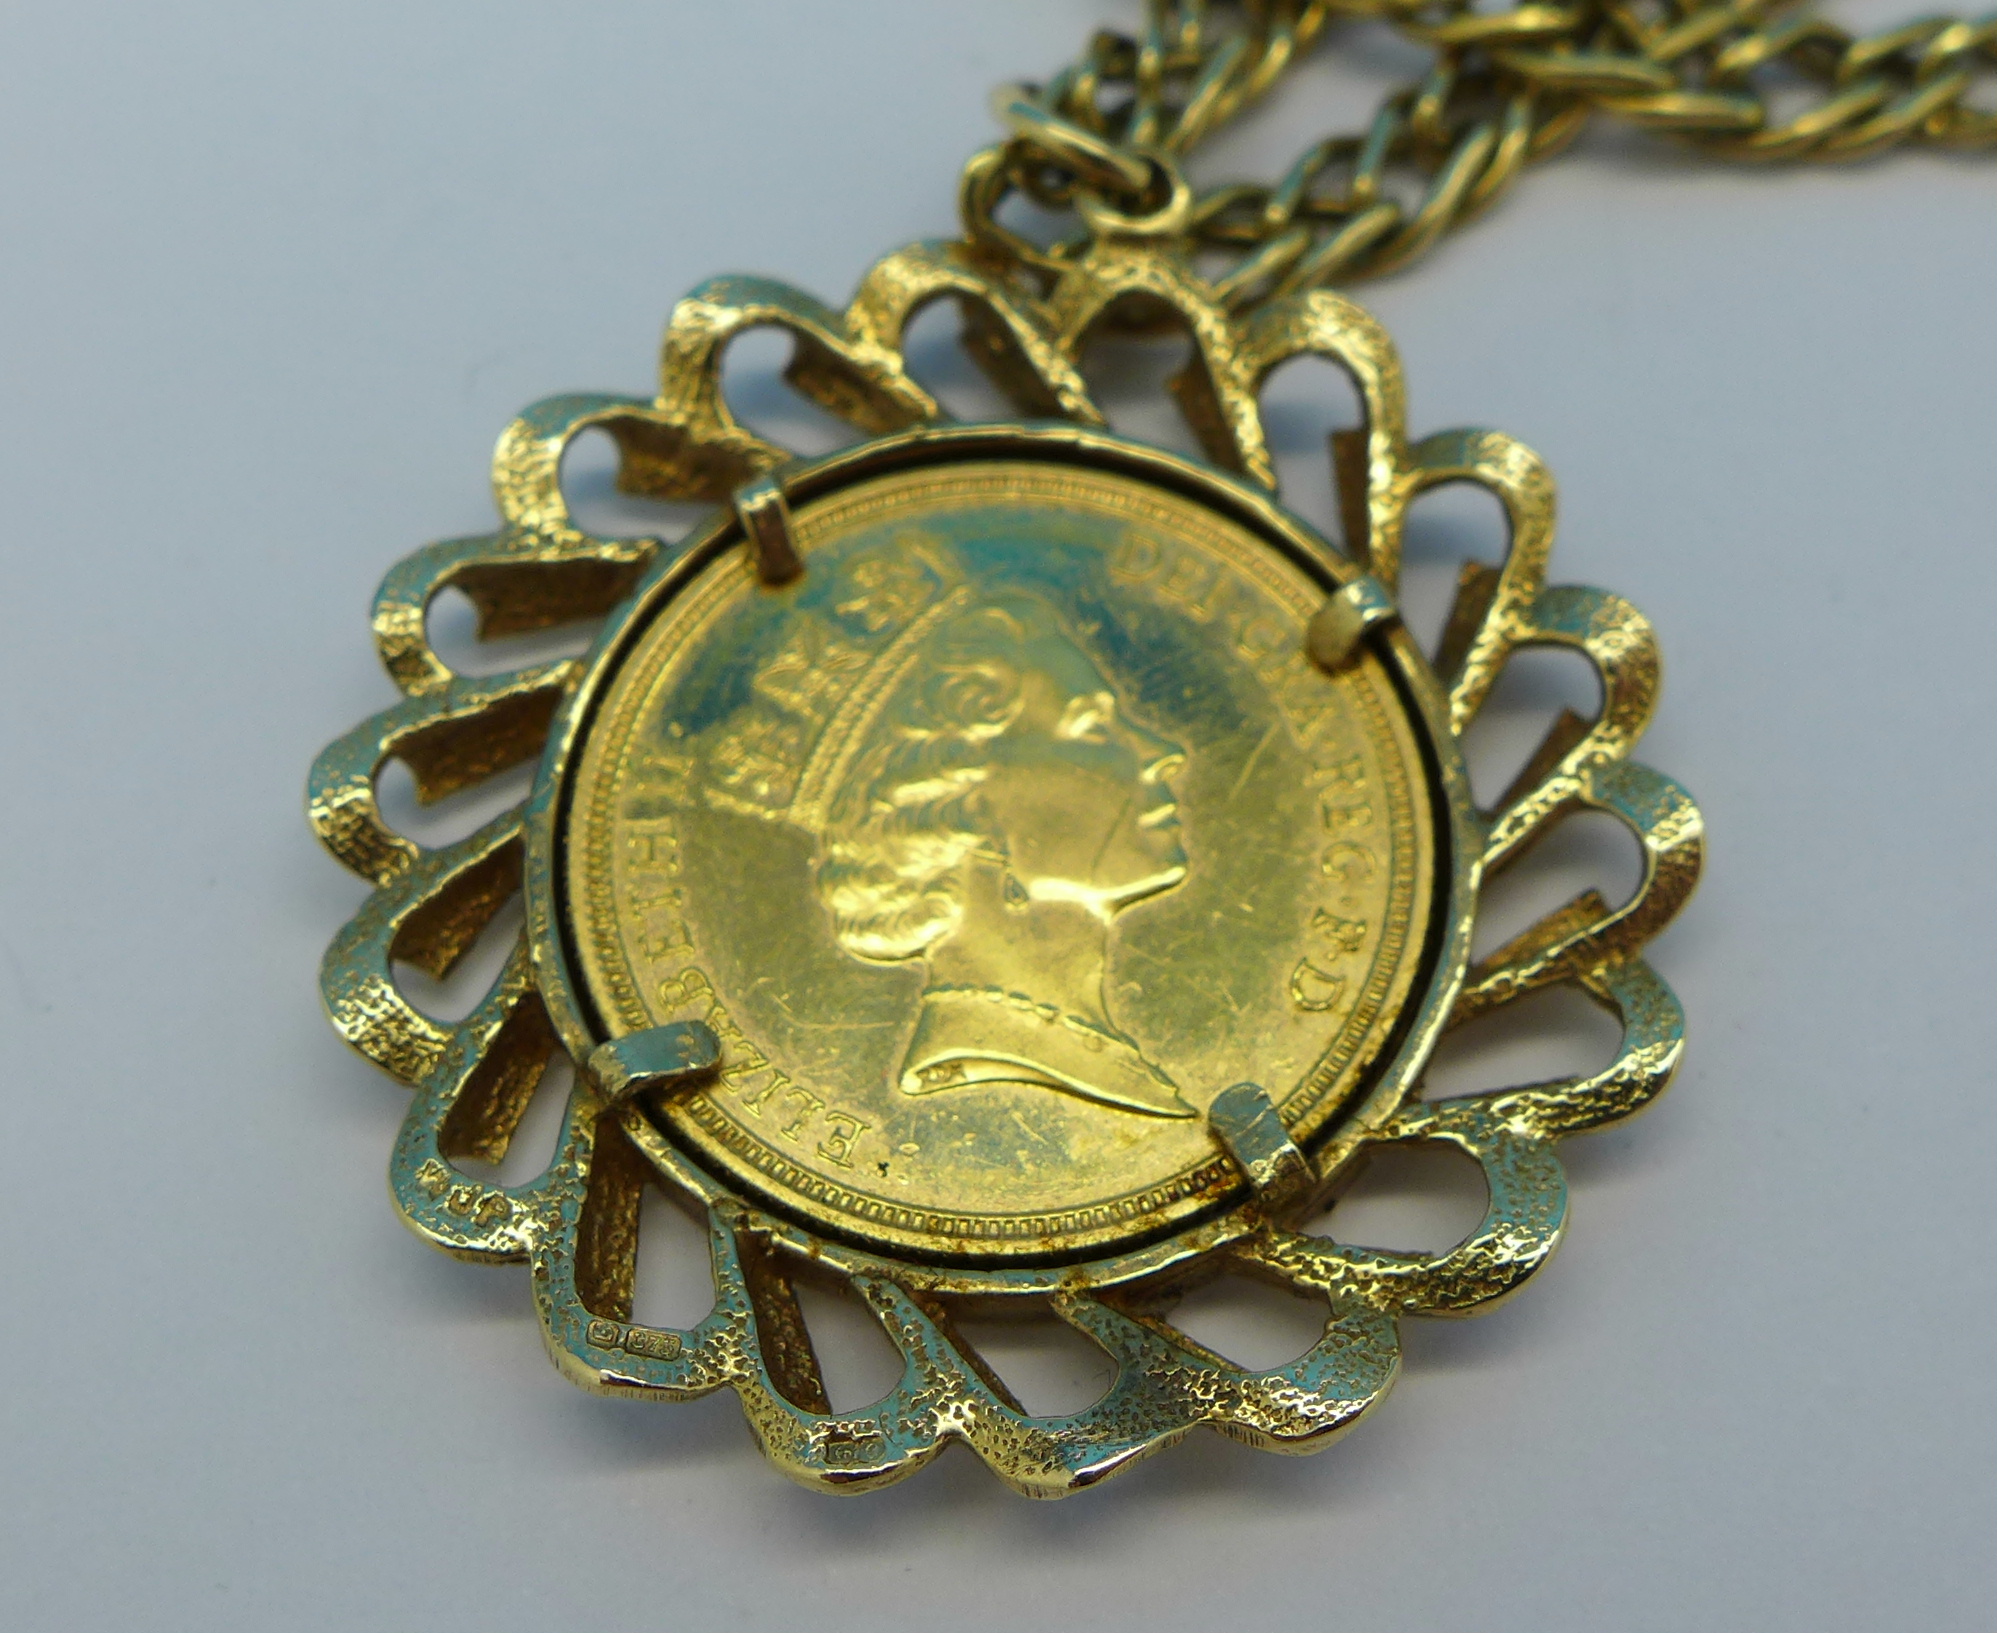 A 1994 full sovereign in a 9ct gold mount on a 9ct gold chain, chain a/f, 21. - Image 3 of 3